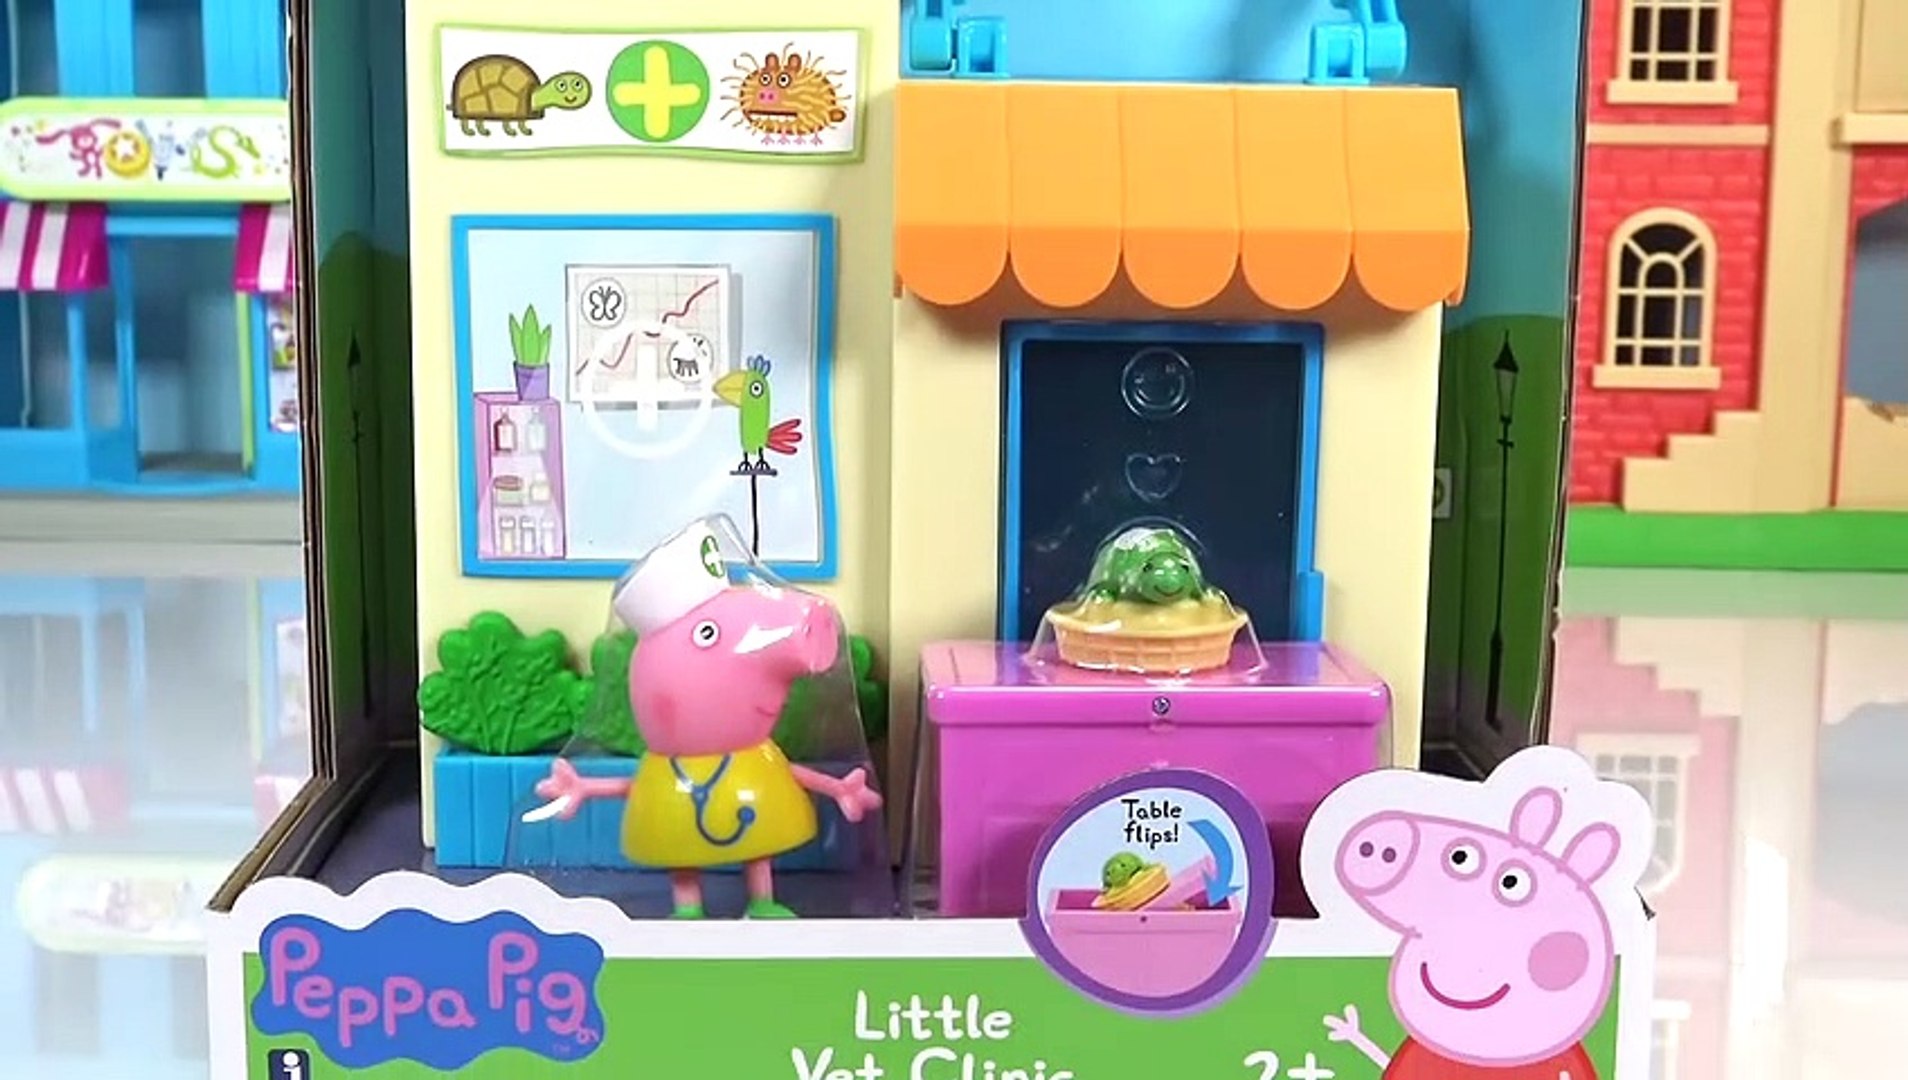 Peppa Pig - You can find lots of exciting episodes, playlists, compilations  and more on our  channel! Check it out:  # peppapig #